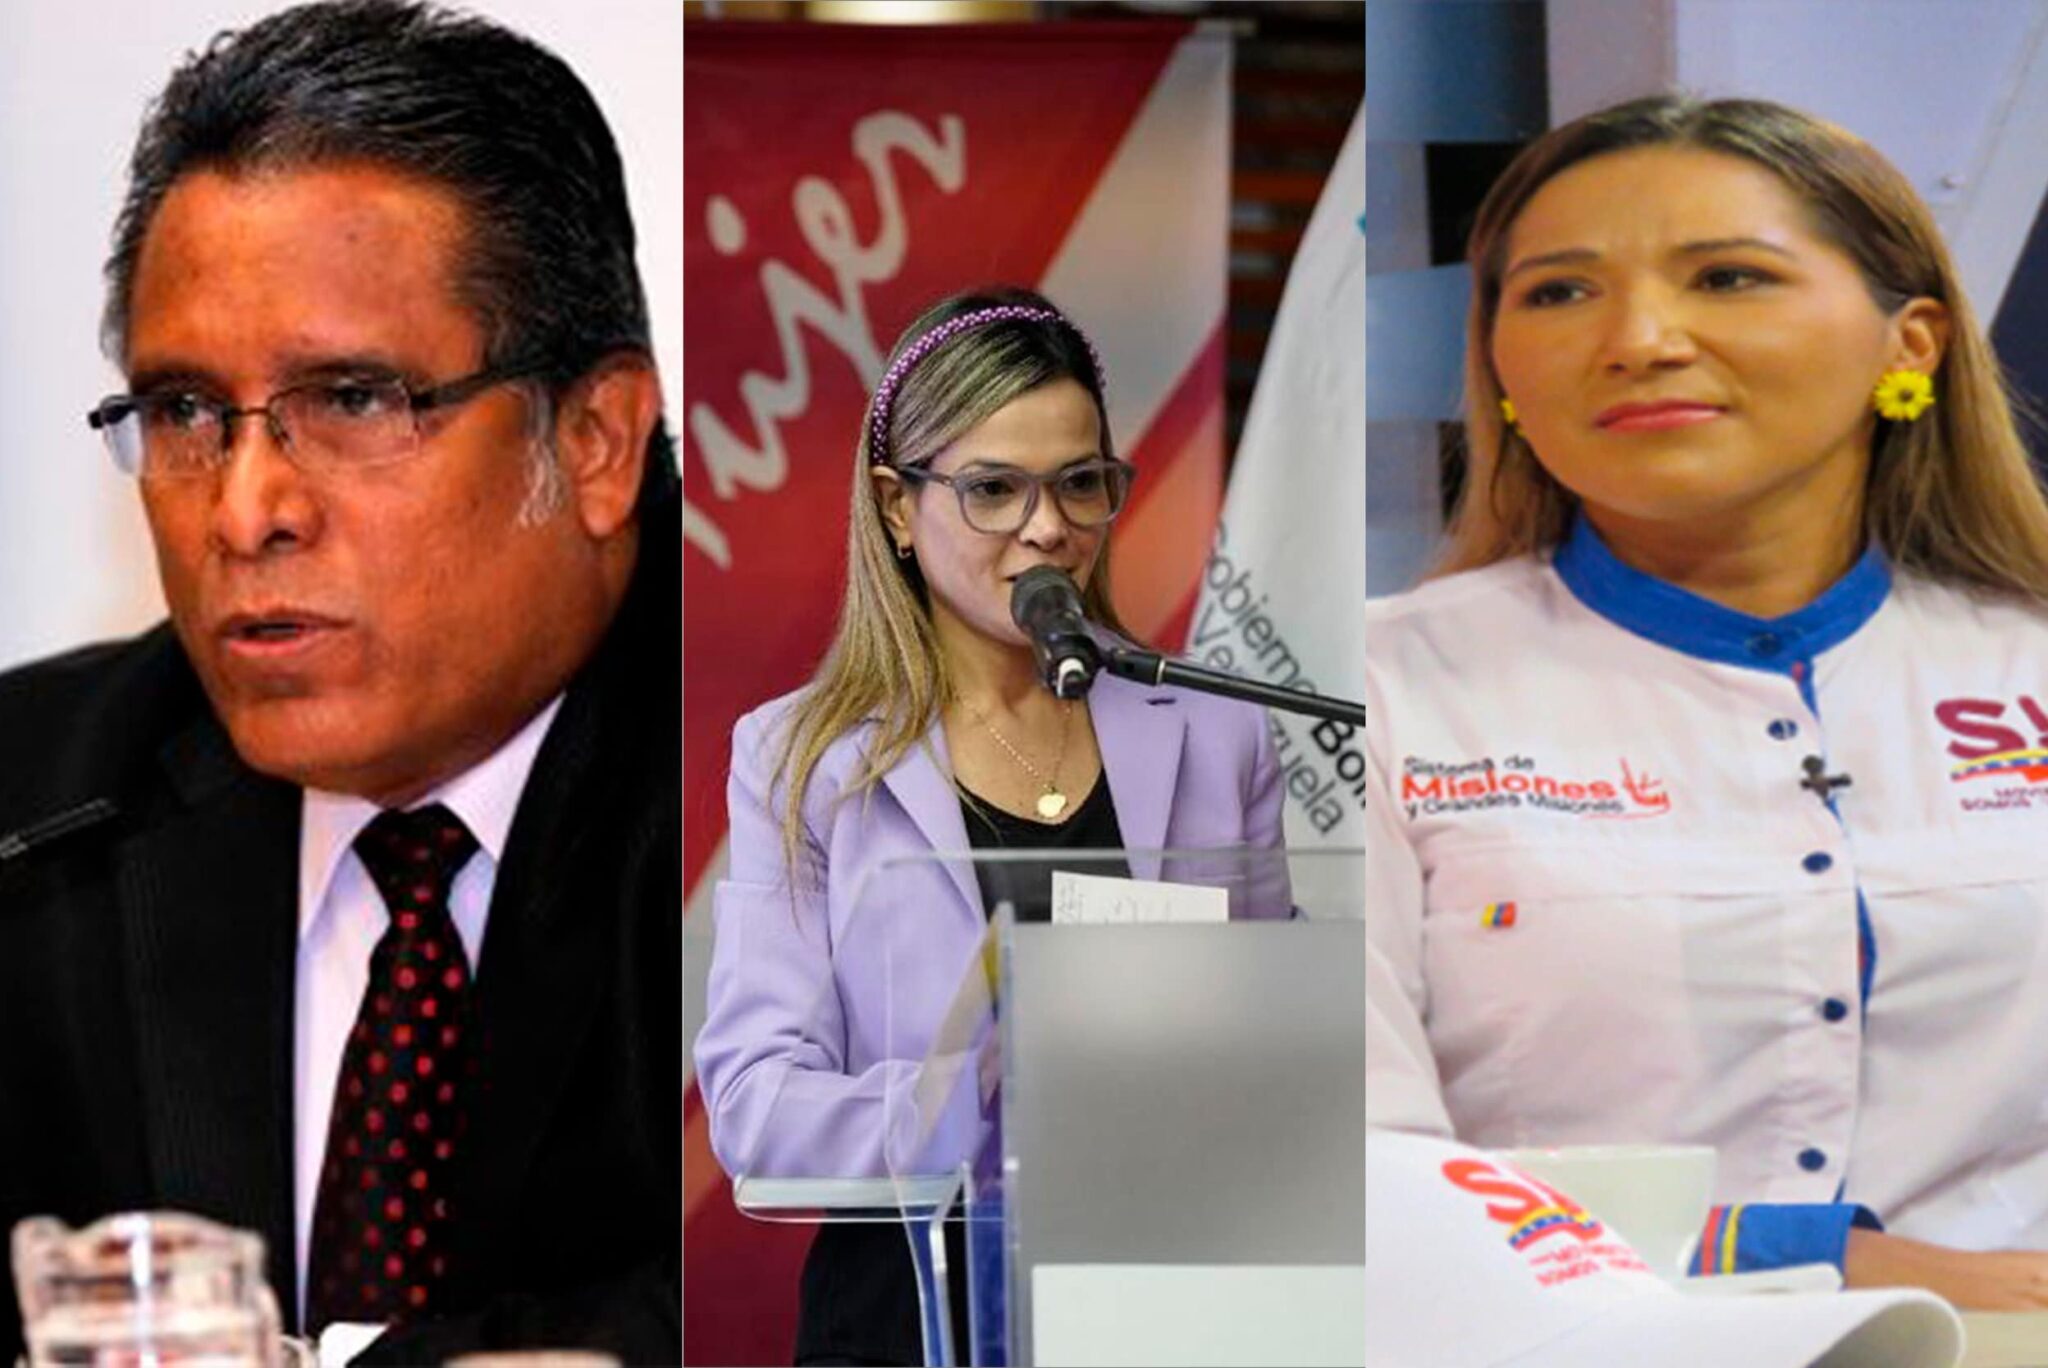 From left to right, newly appointed ministers: José Félix Rivas (Industries and National Production), Dhéliz Álvarez (National Commerce), and Jhoanna Gabriela Carrillo Malavé (Urban Agriculture). Photo: Crónica Uno.